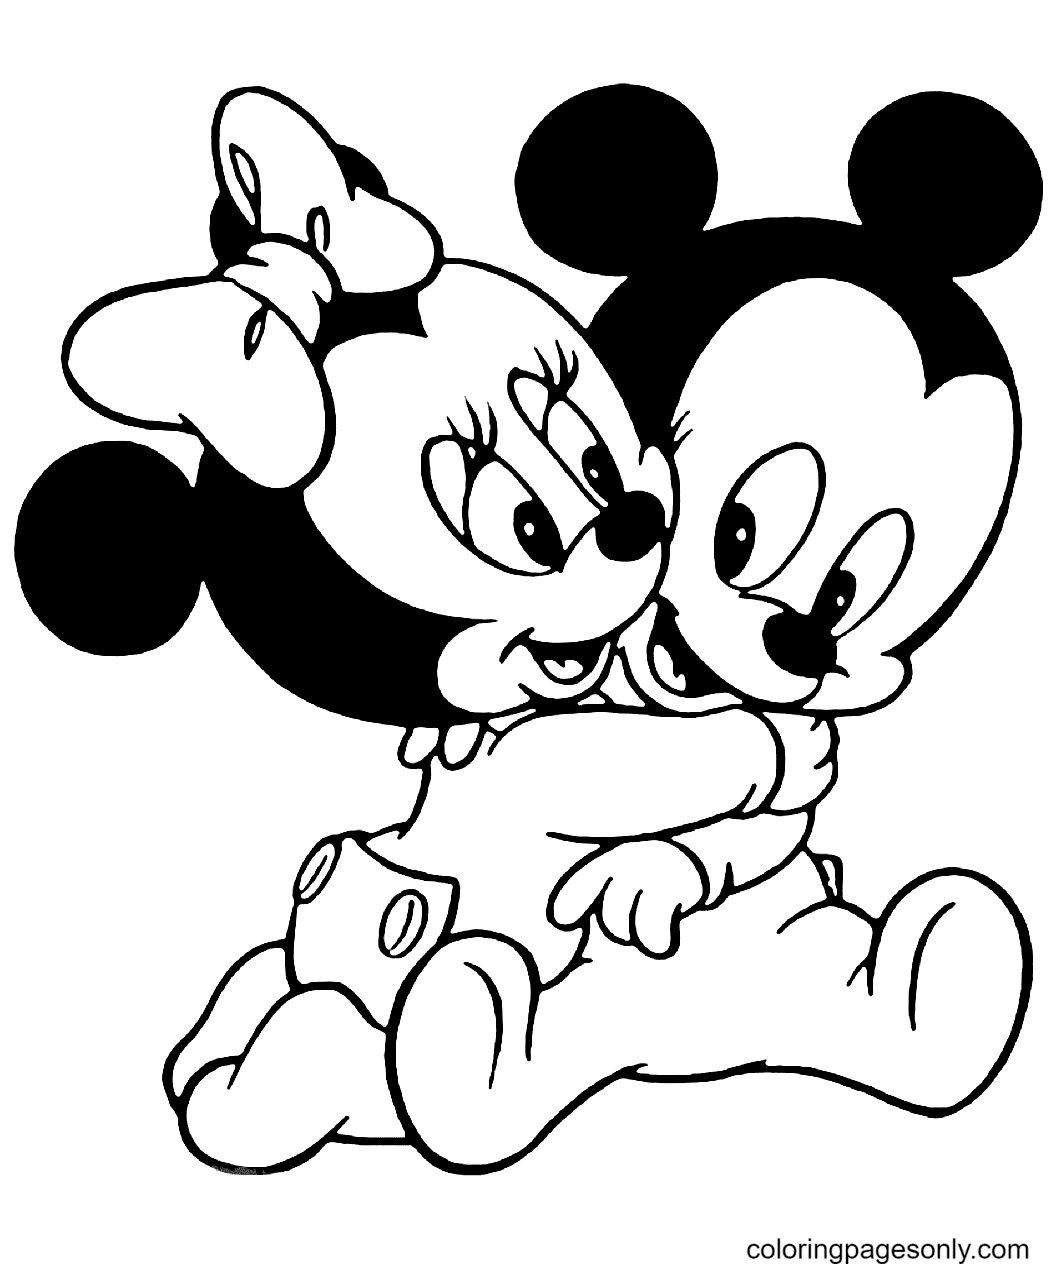 Baby Minnie Mouse en Mickey Mouse van Minnie Mouse